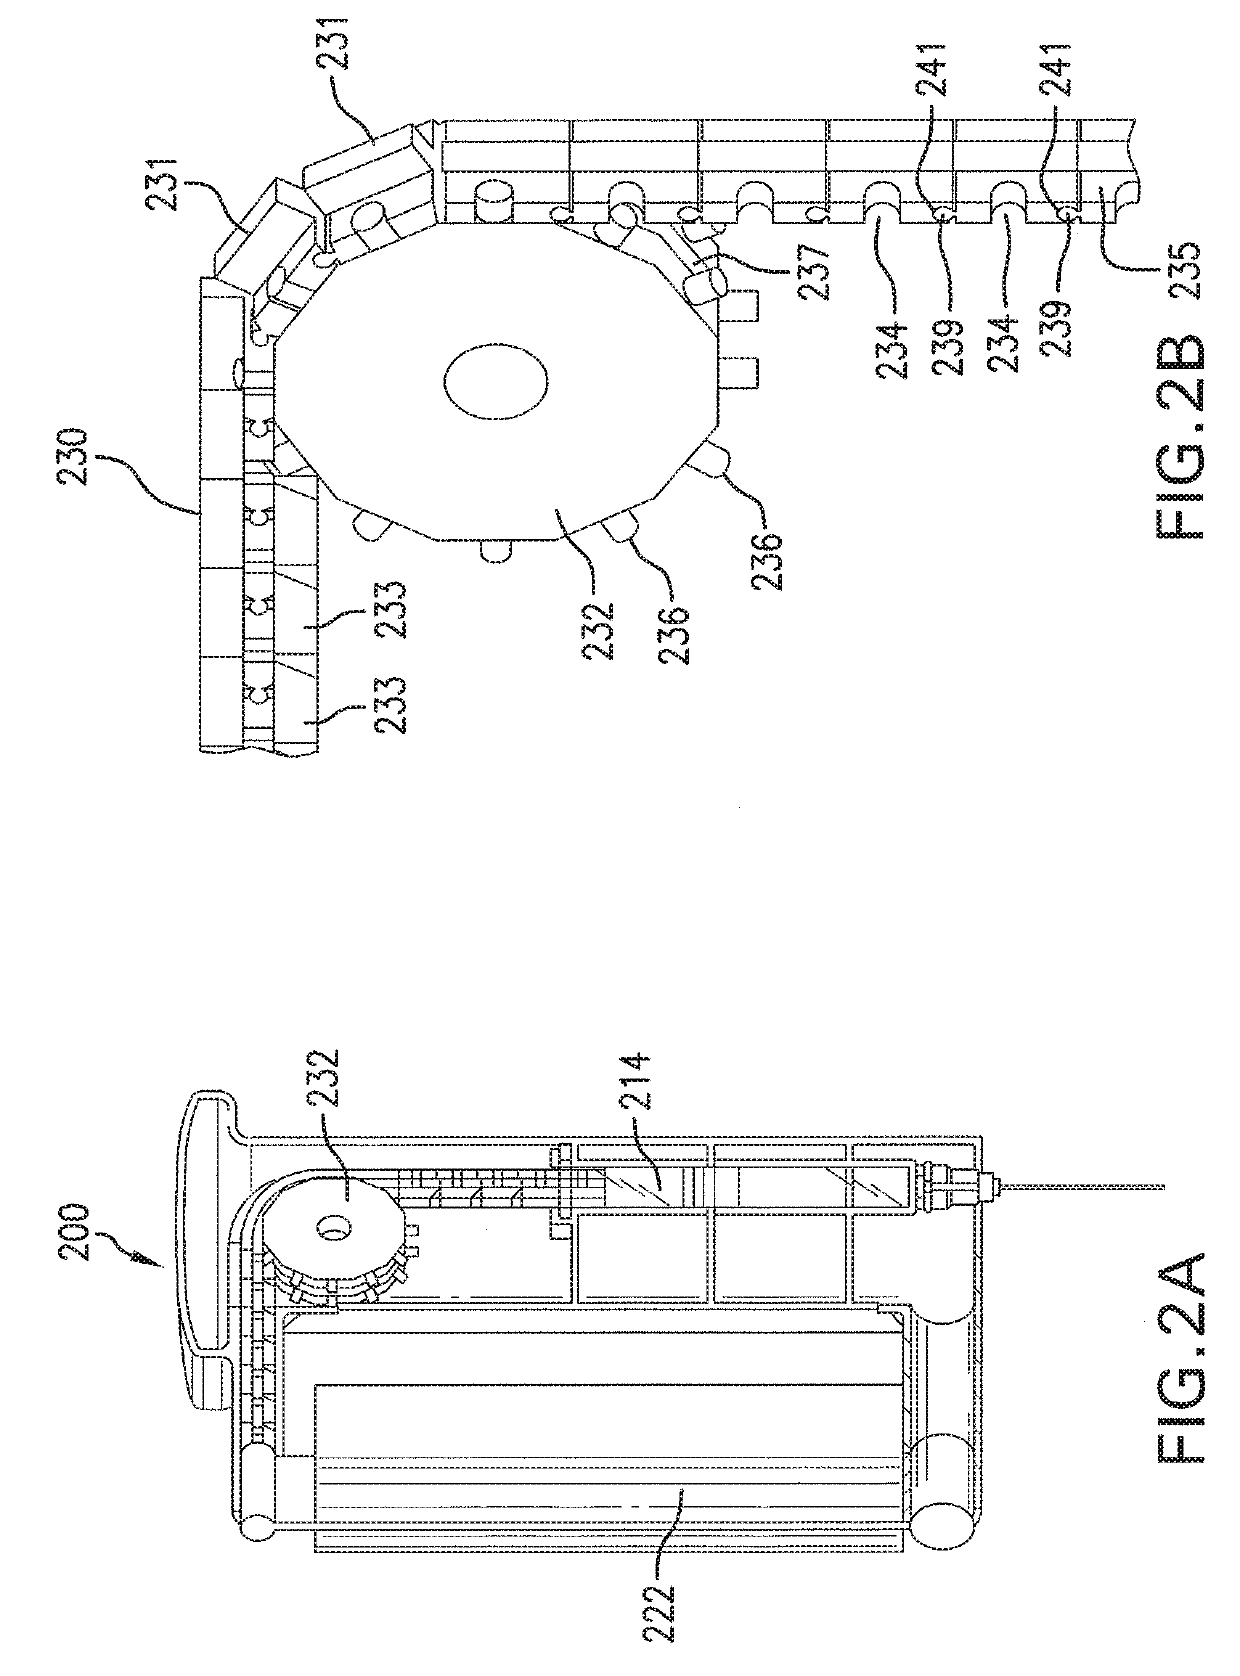 Manually-Actuated Injection Device for High-Viscosity Drugs